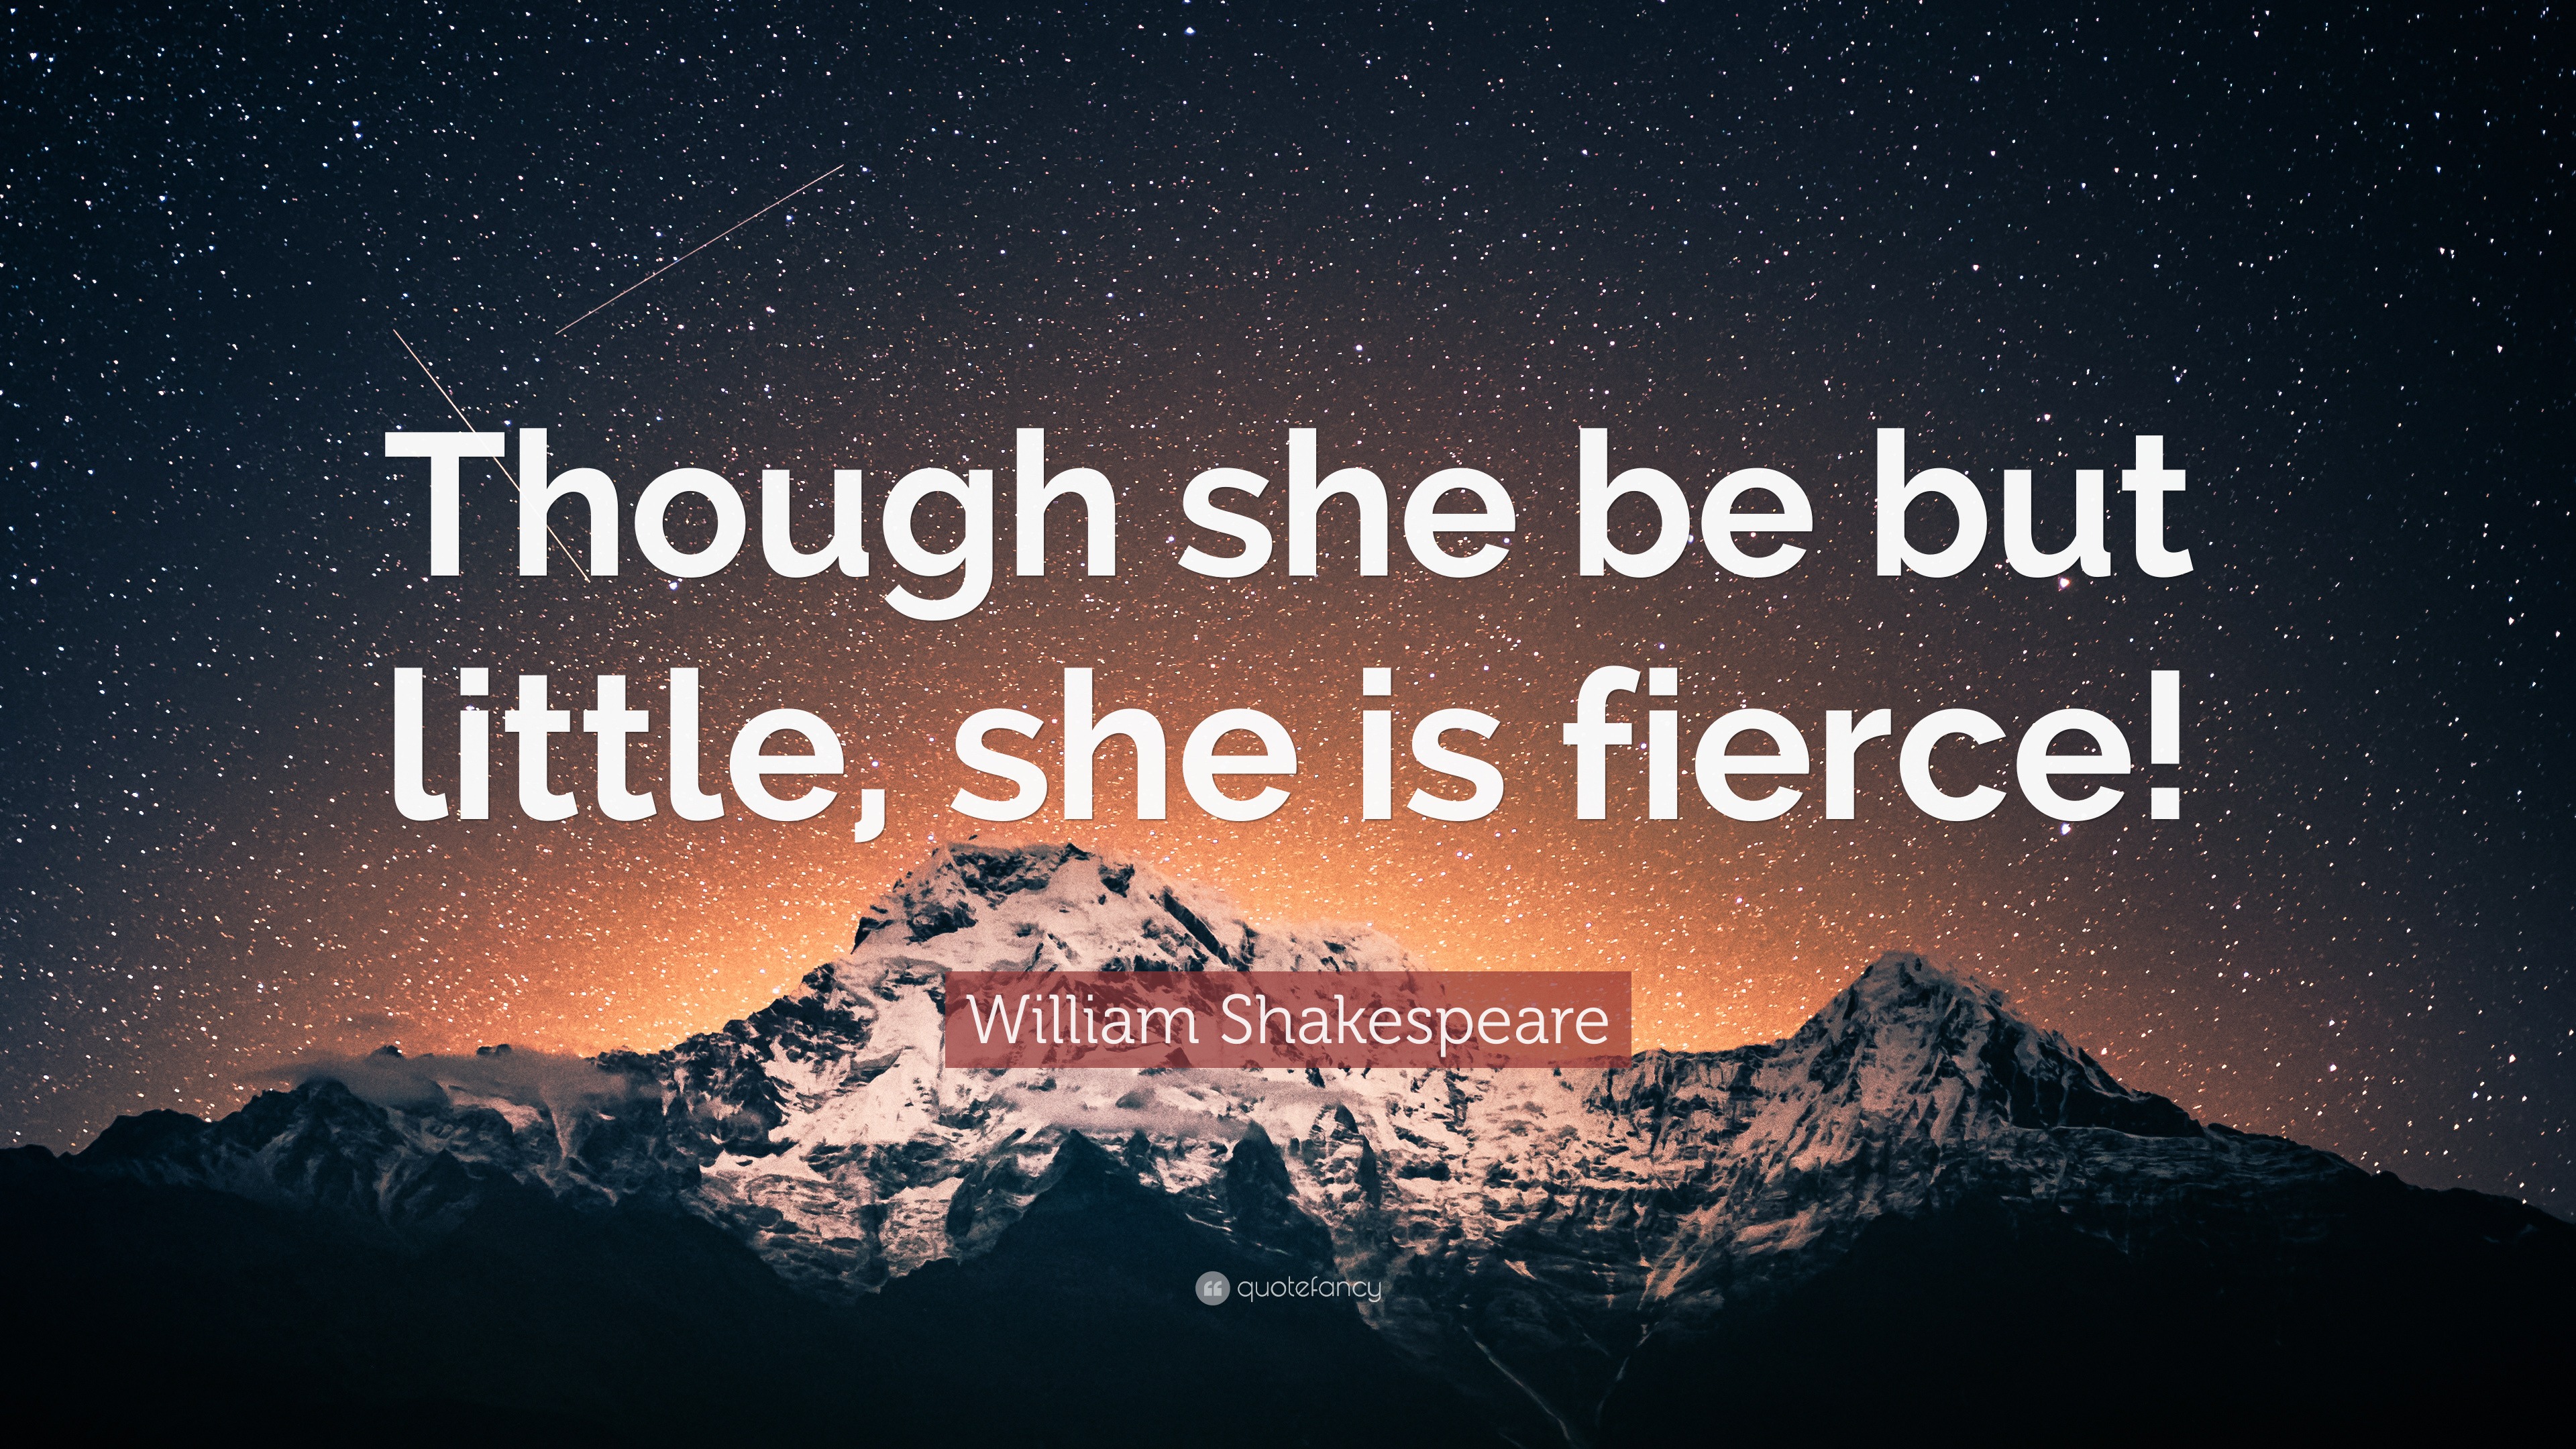 William Shakespeare Quote: “Though she be but little, she is fierce!”